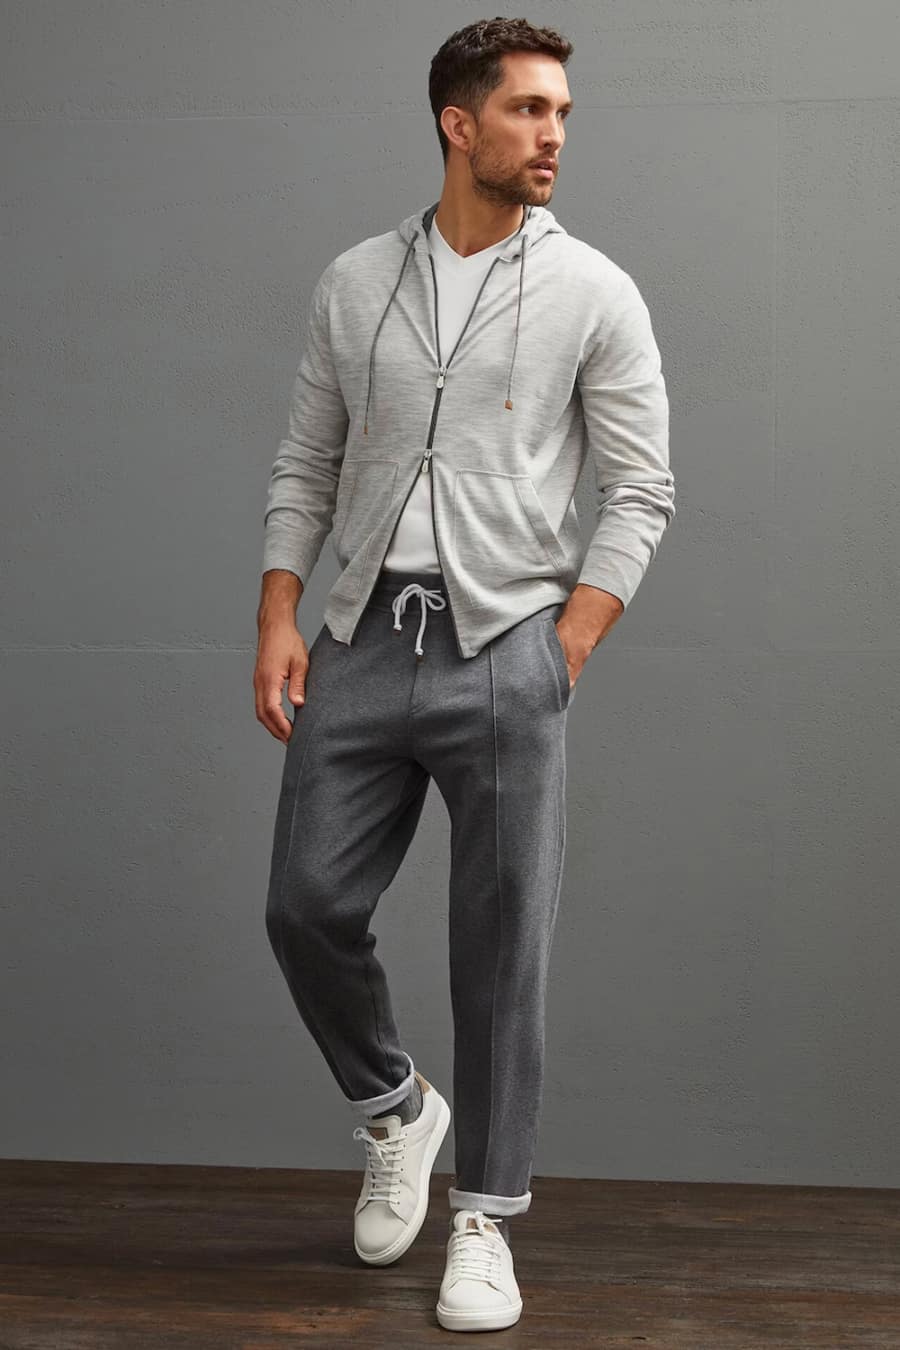 Men's grey tailored sweatpants, white T-shirt, grey zip hoodie and white sneakers outfit